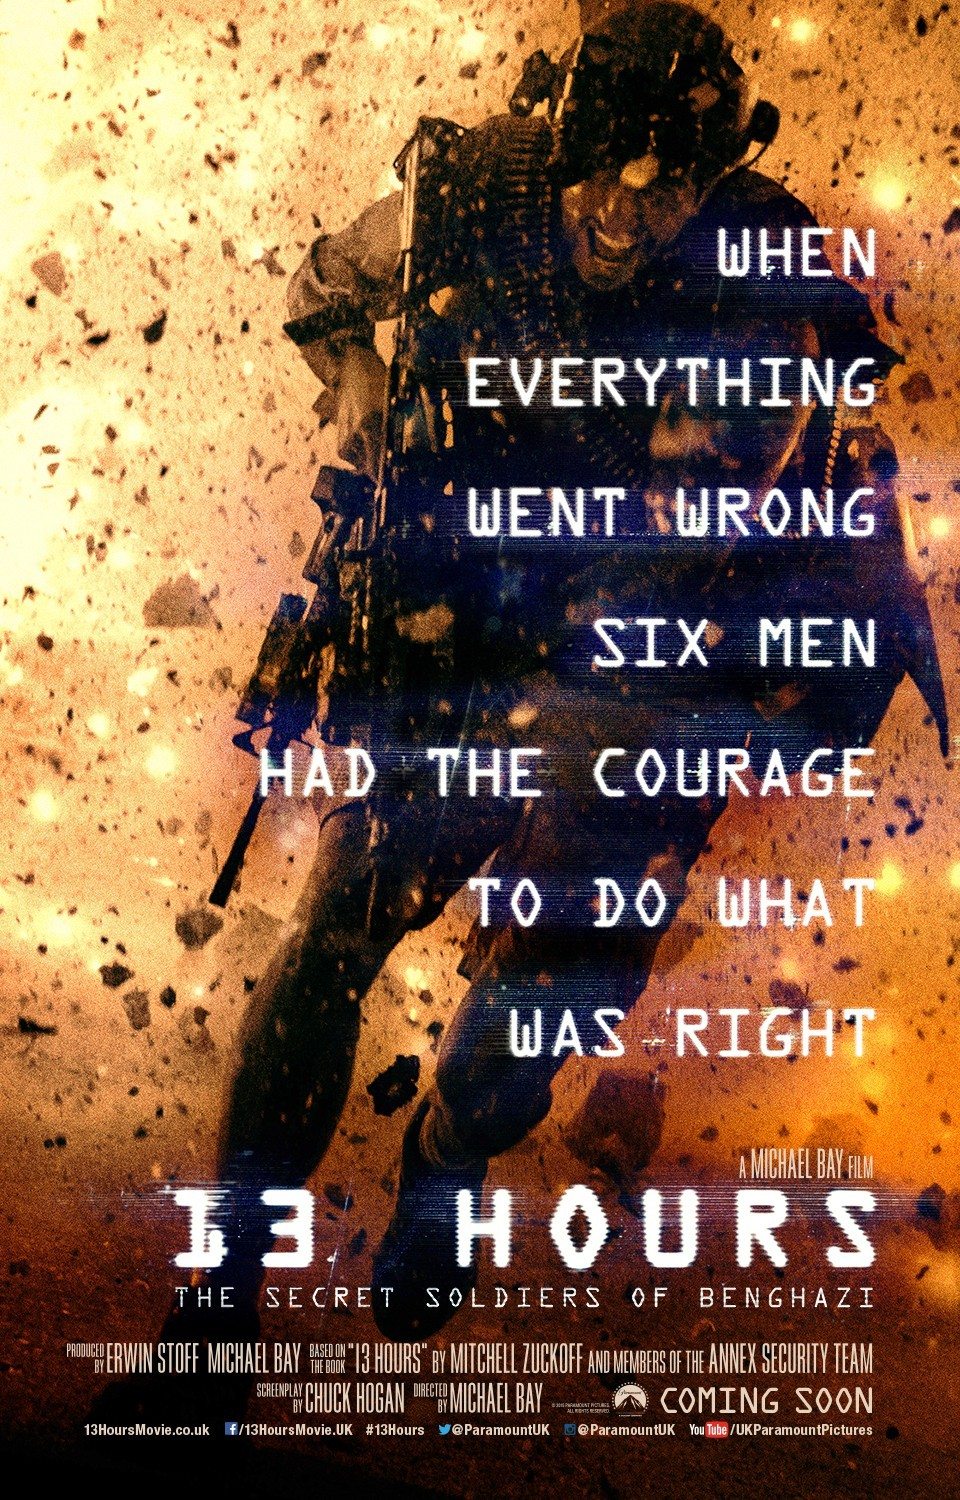 Poster of Paramount Pictures'  13 Hours: The Secret Soldiers of Benghazi (2016)